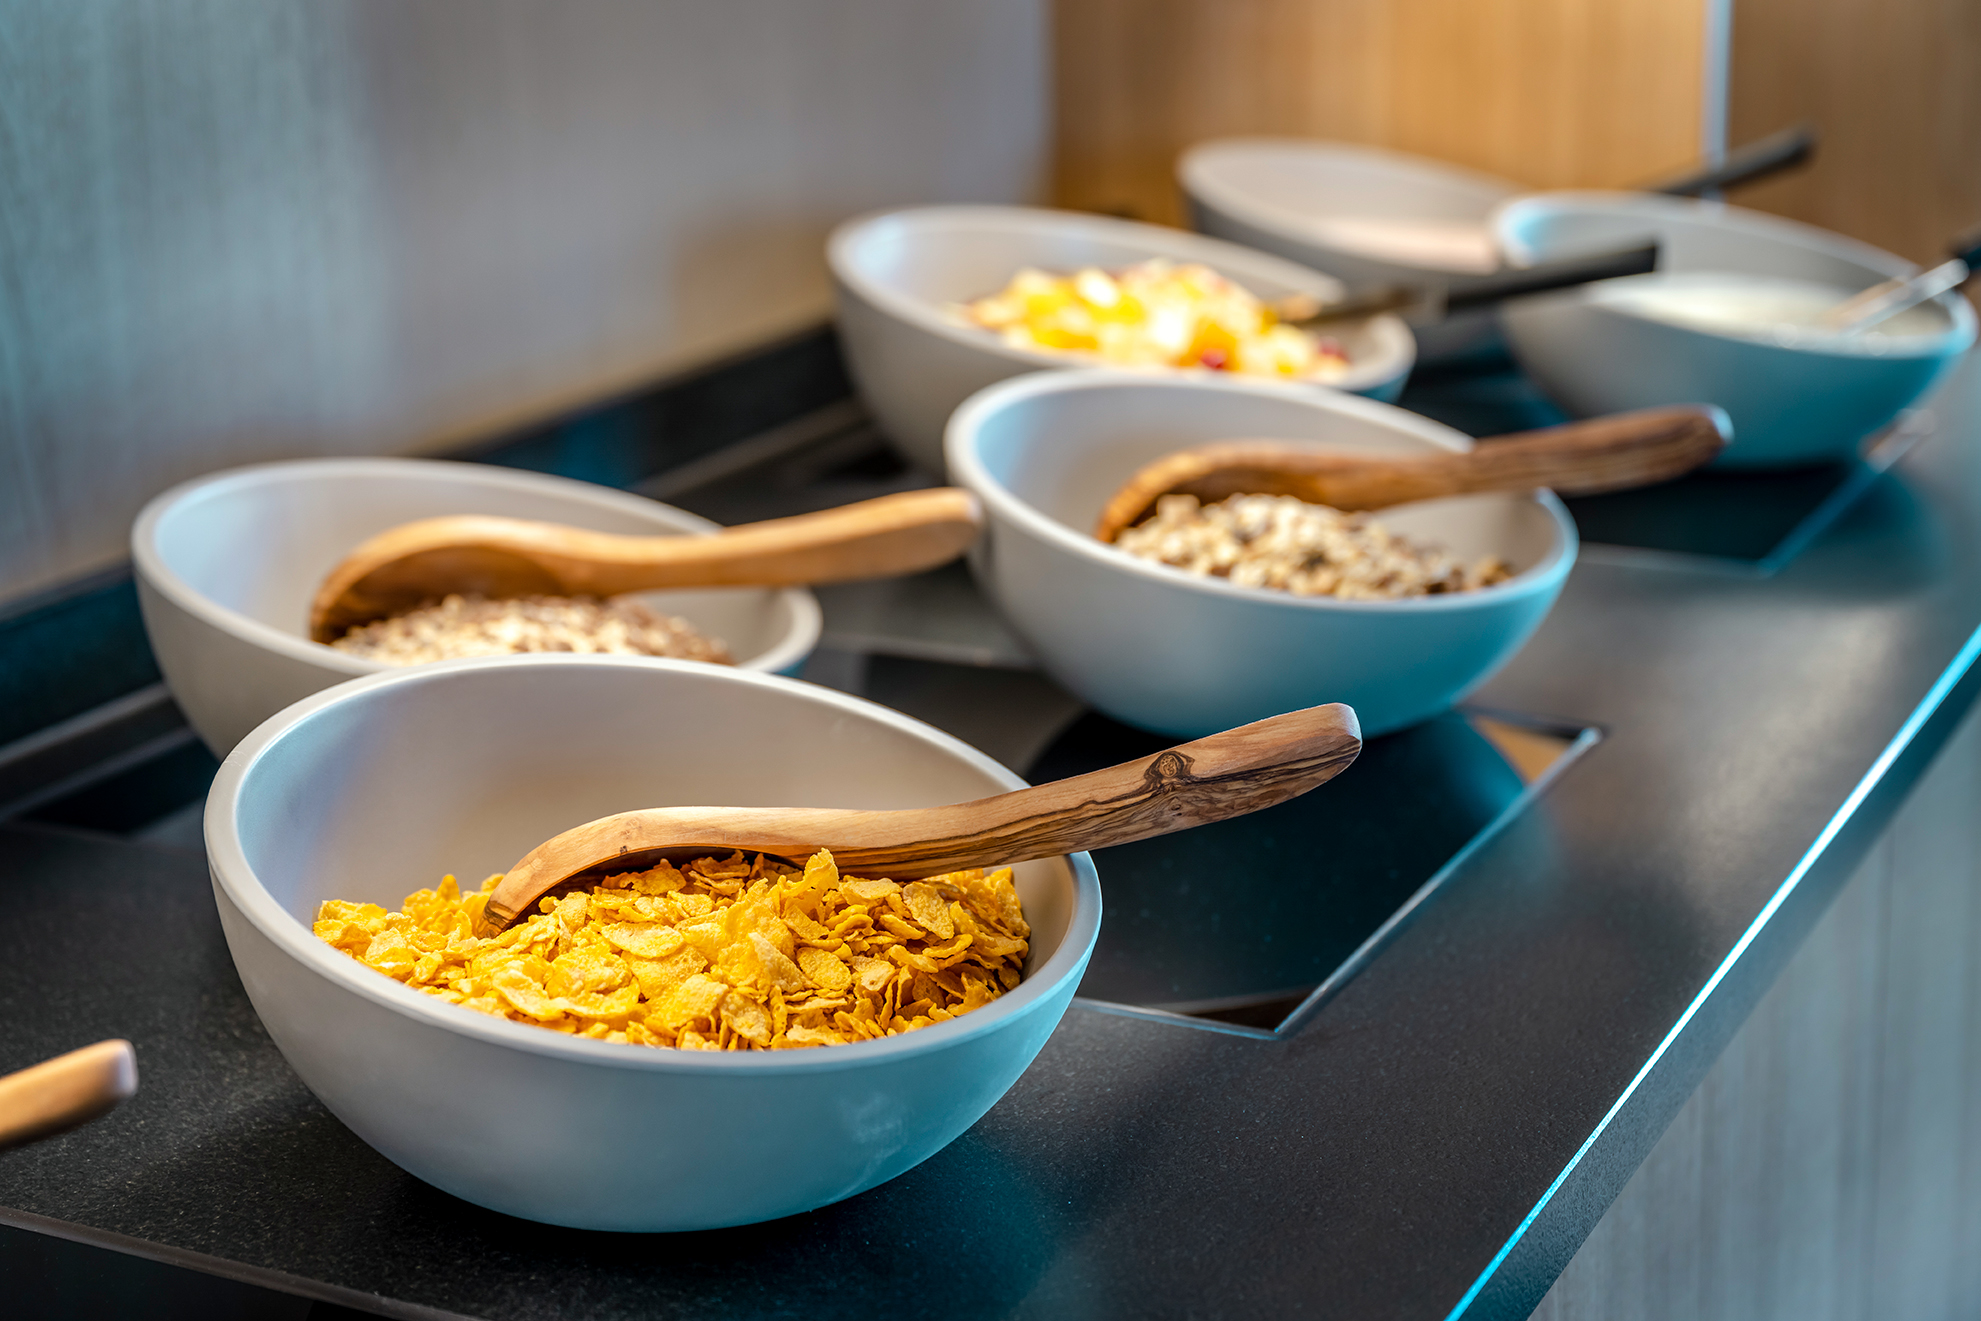 cereals at the breakfast buffet